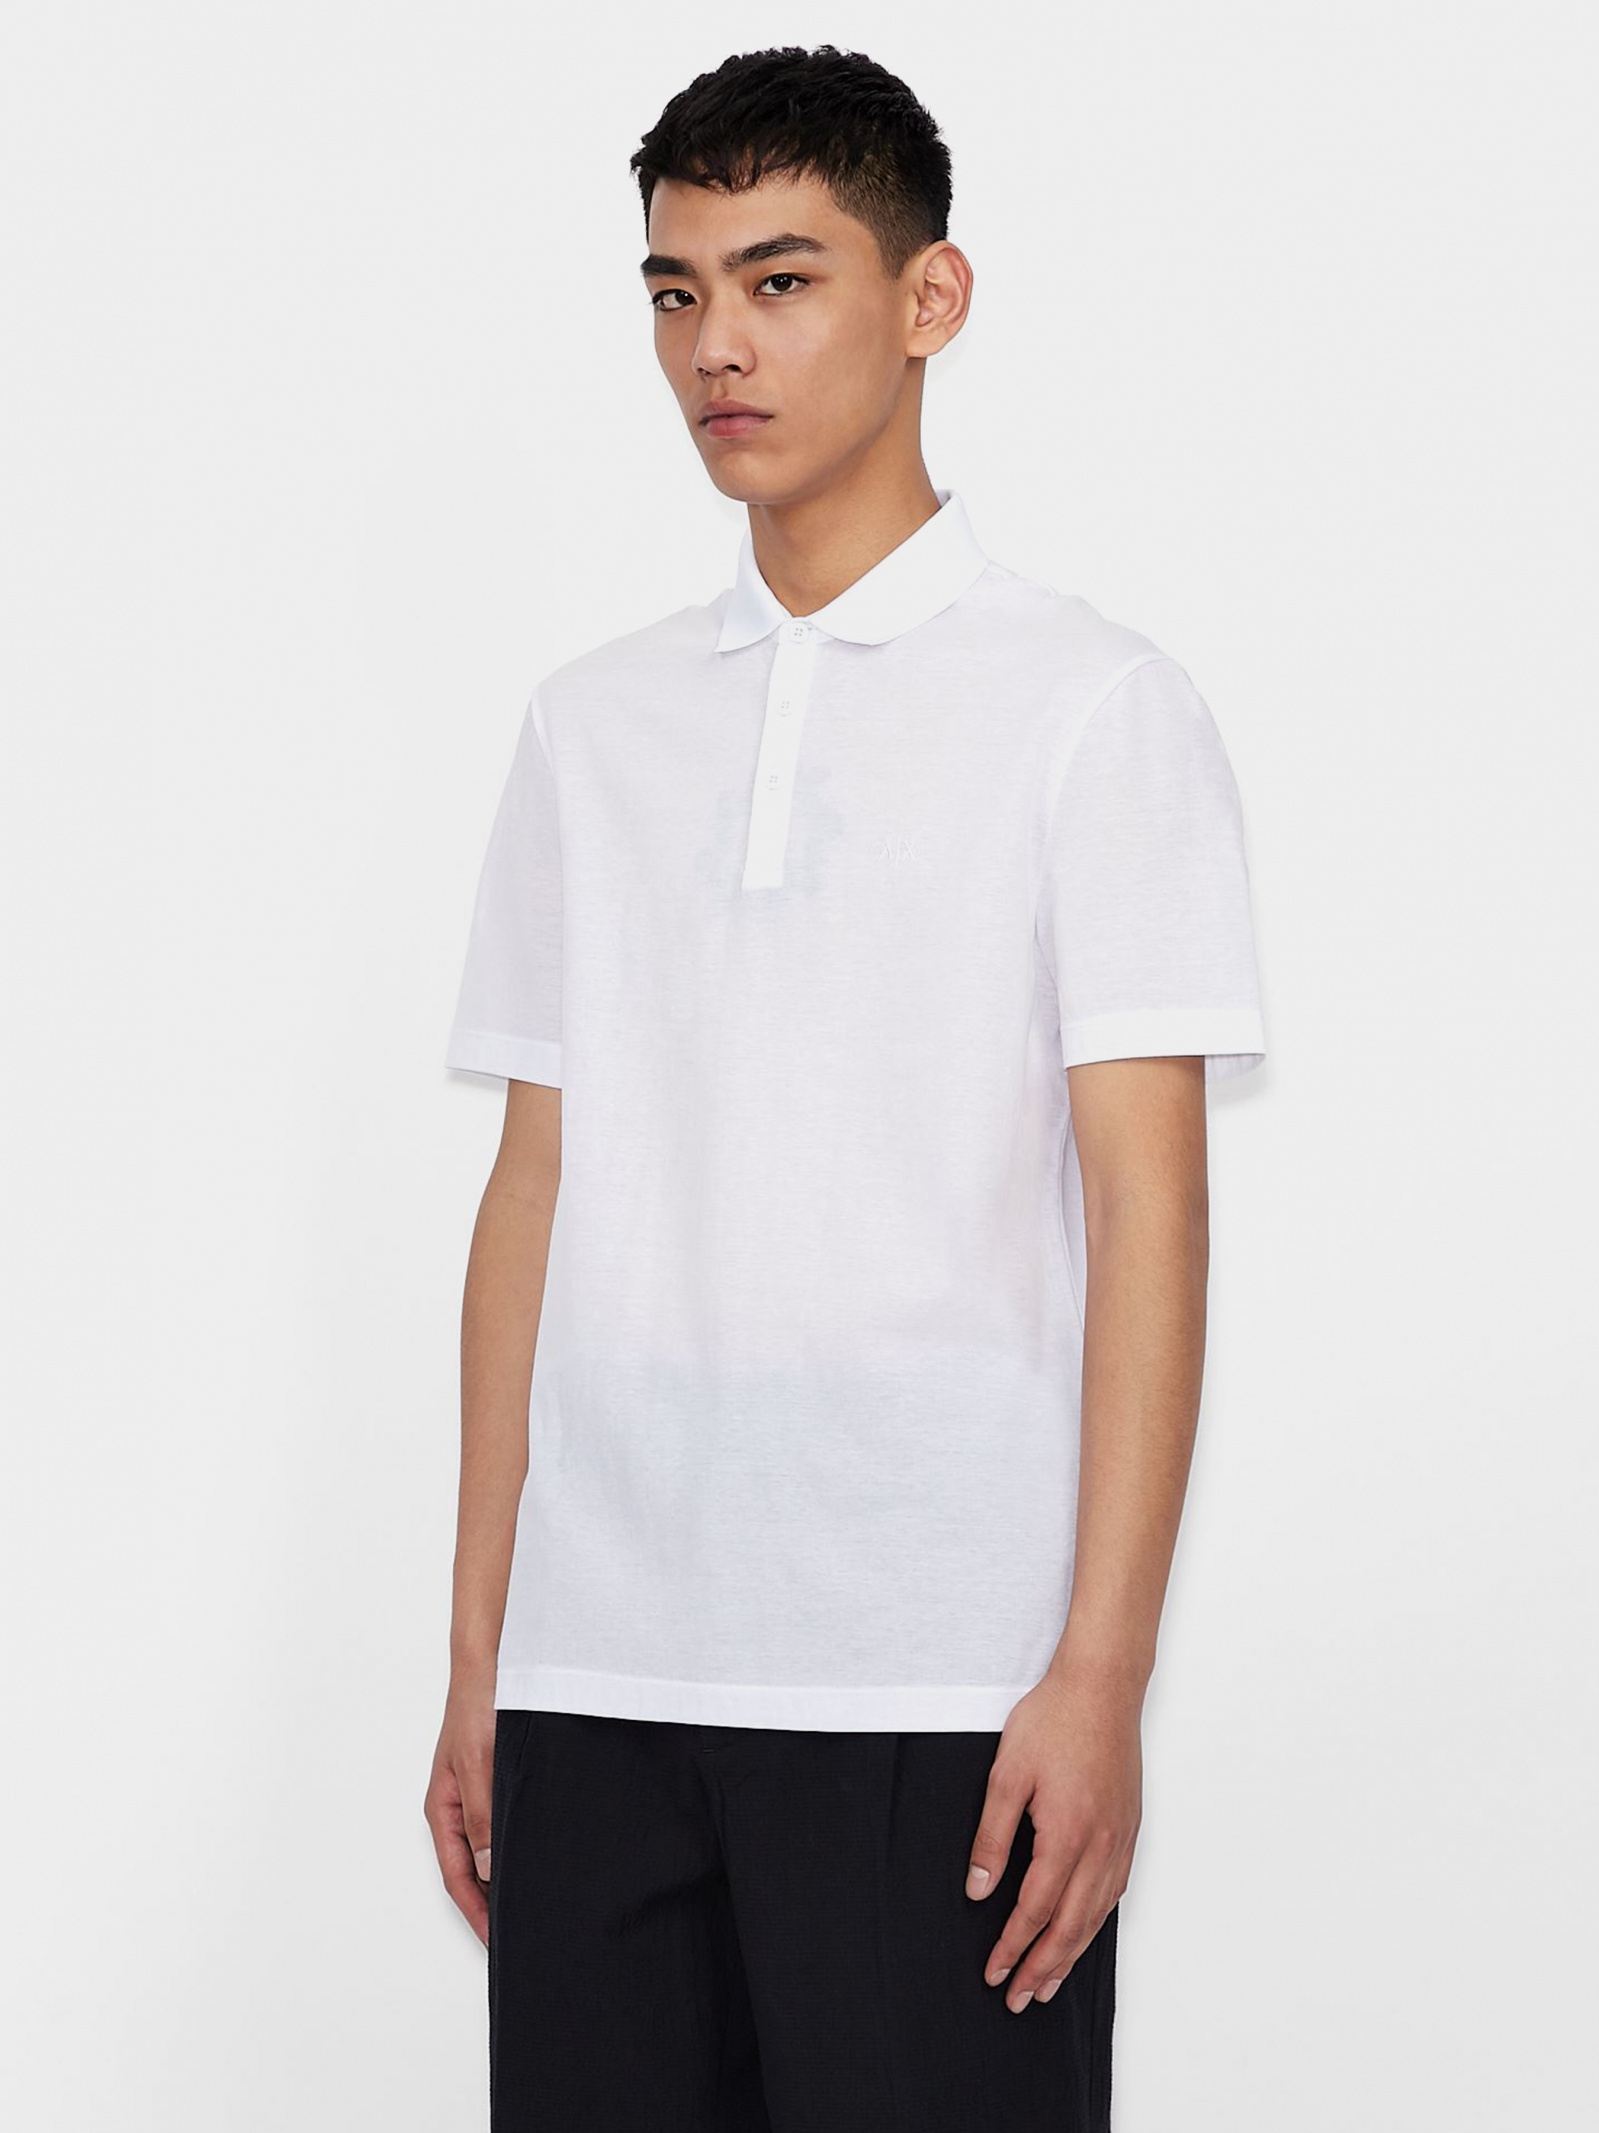 Solid White Slim Fit Polo T-Shirt